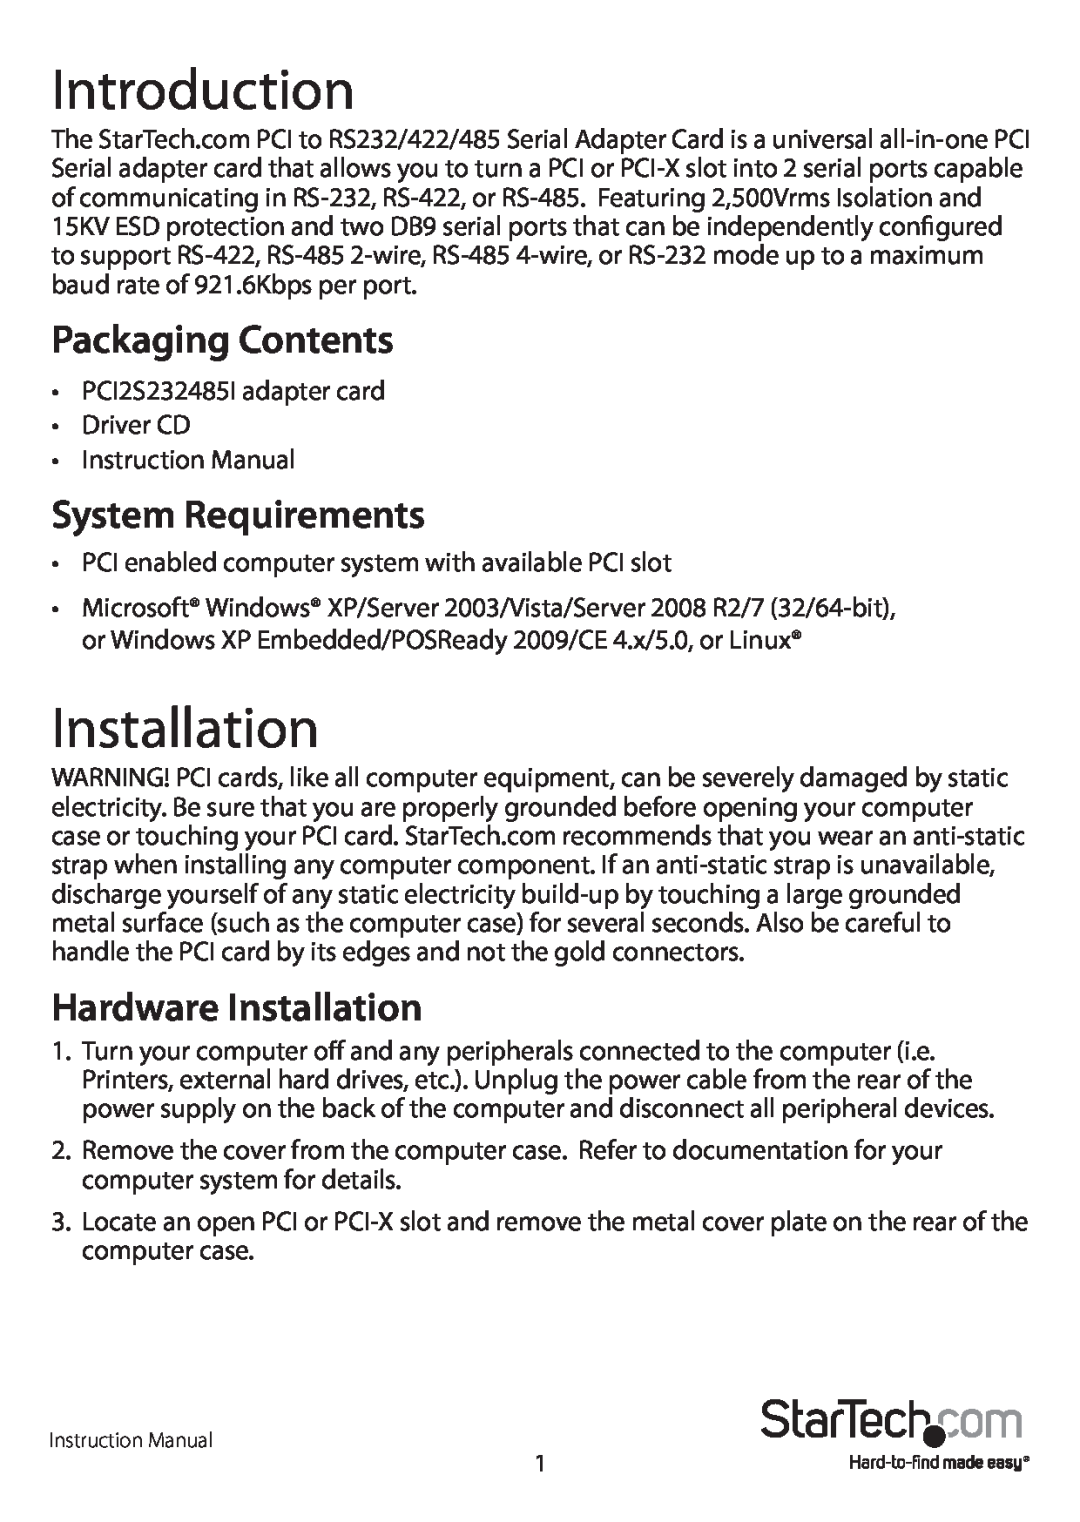 StarTech.com PCI2S232485I manual Introduction, Packaging Contents, System Requirements, Hardware Installation 